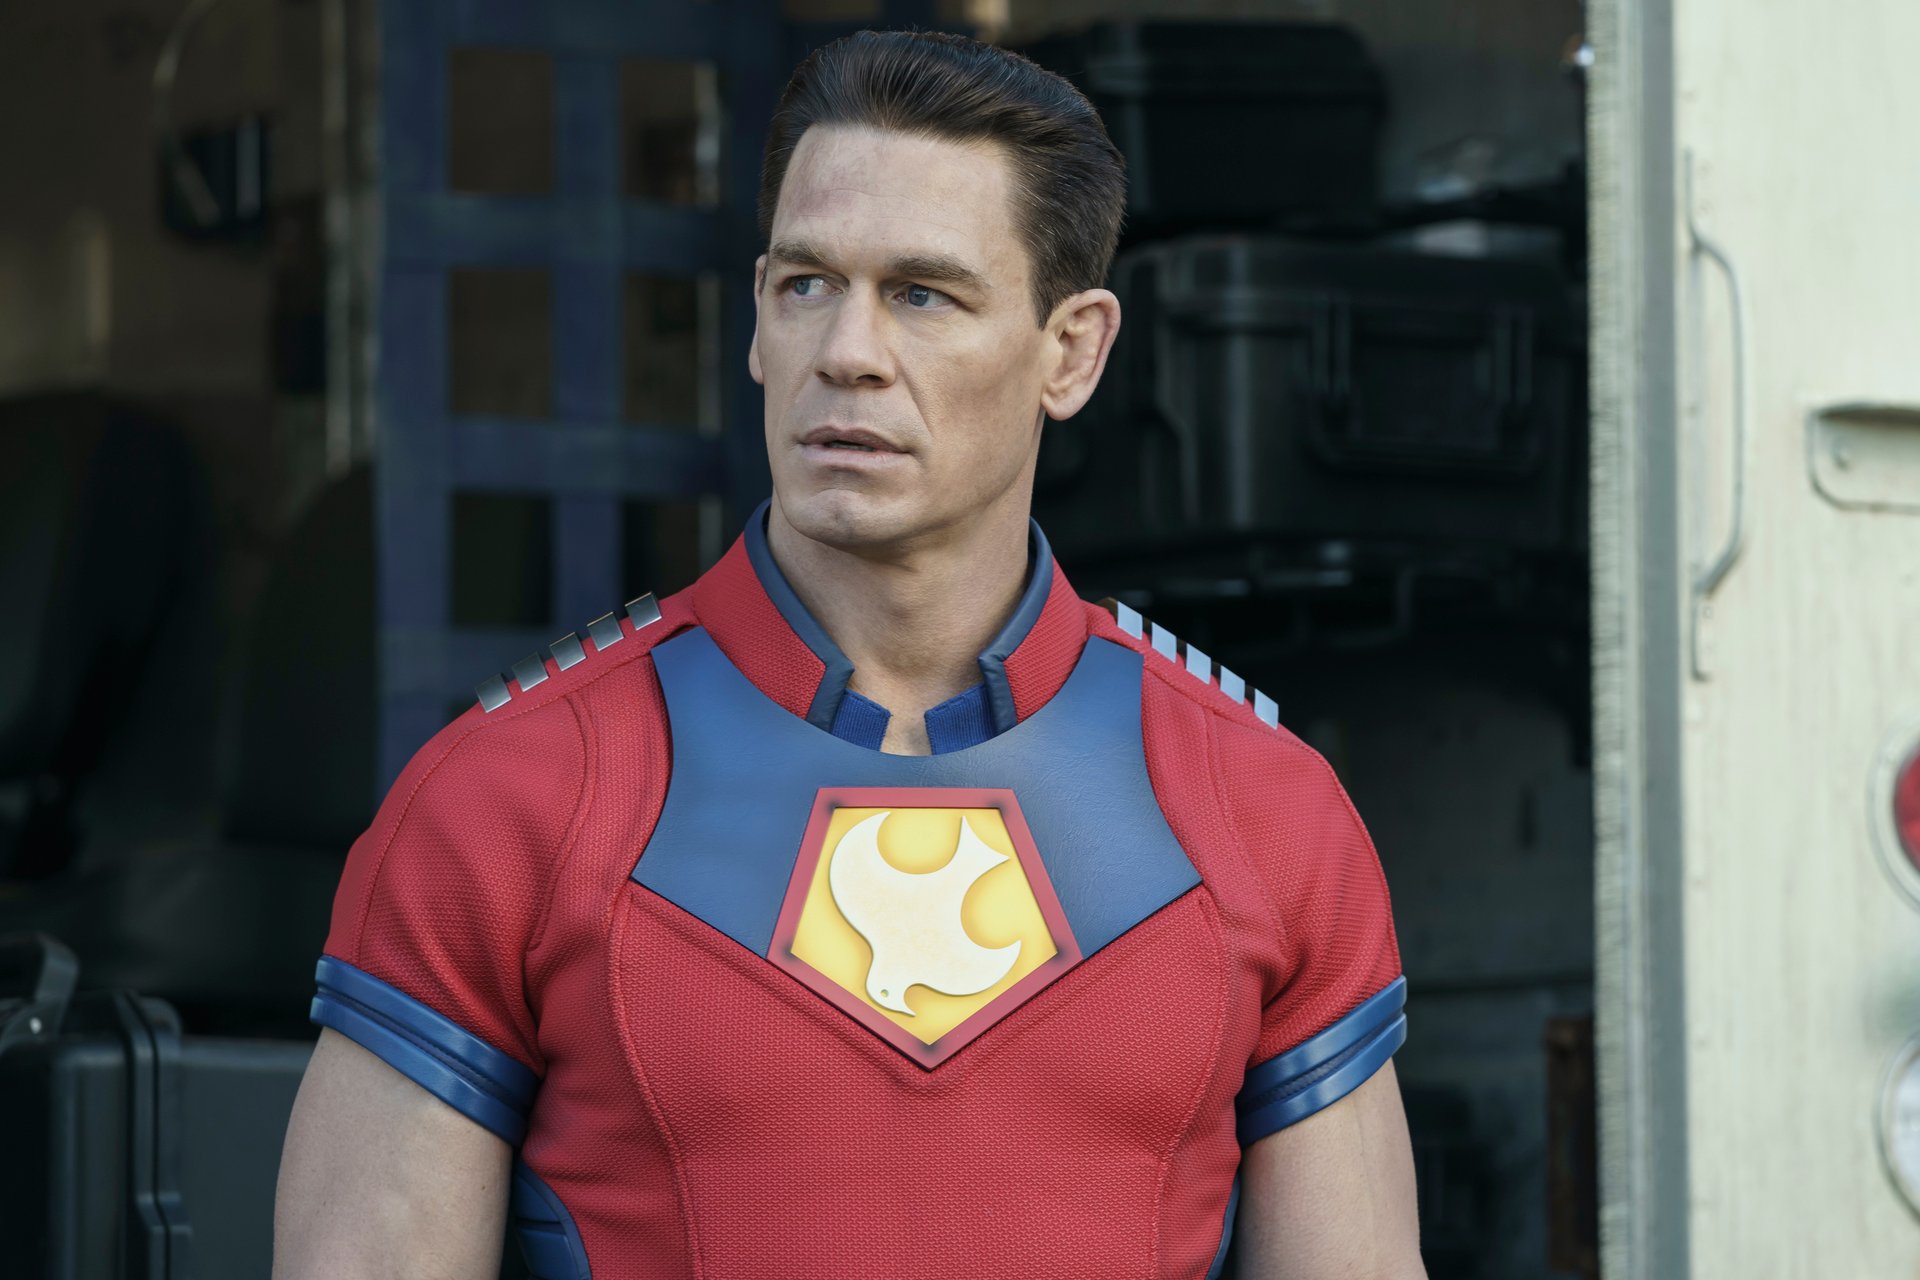 John Cena as Peacemaker, who will return in 'Peacemaker' Season 2. He's wearing a red, blue, and yellow suit and looking to the side of the camera.